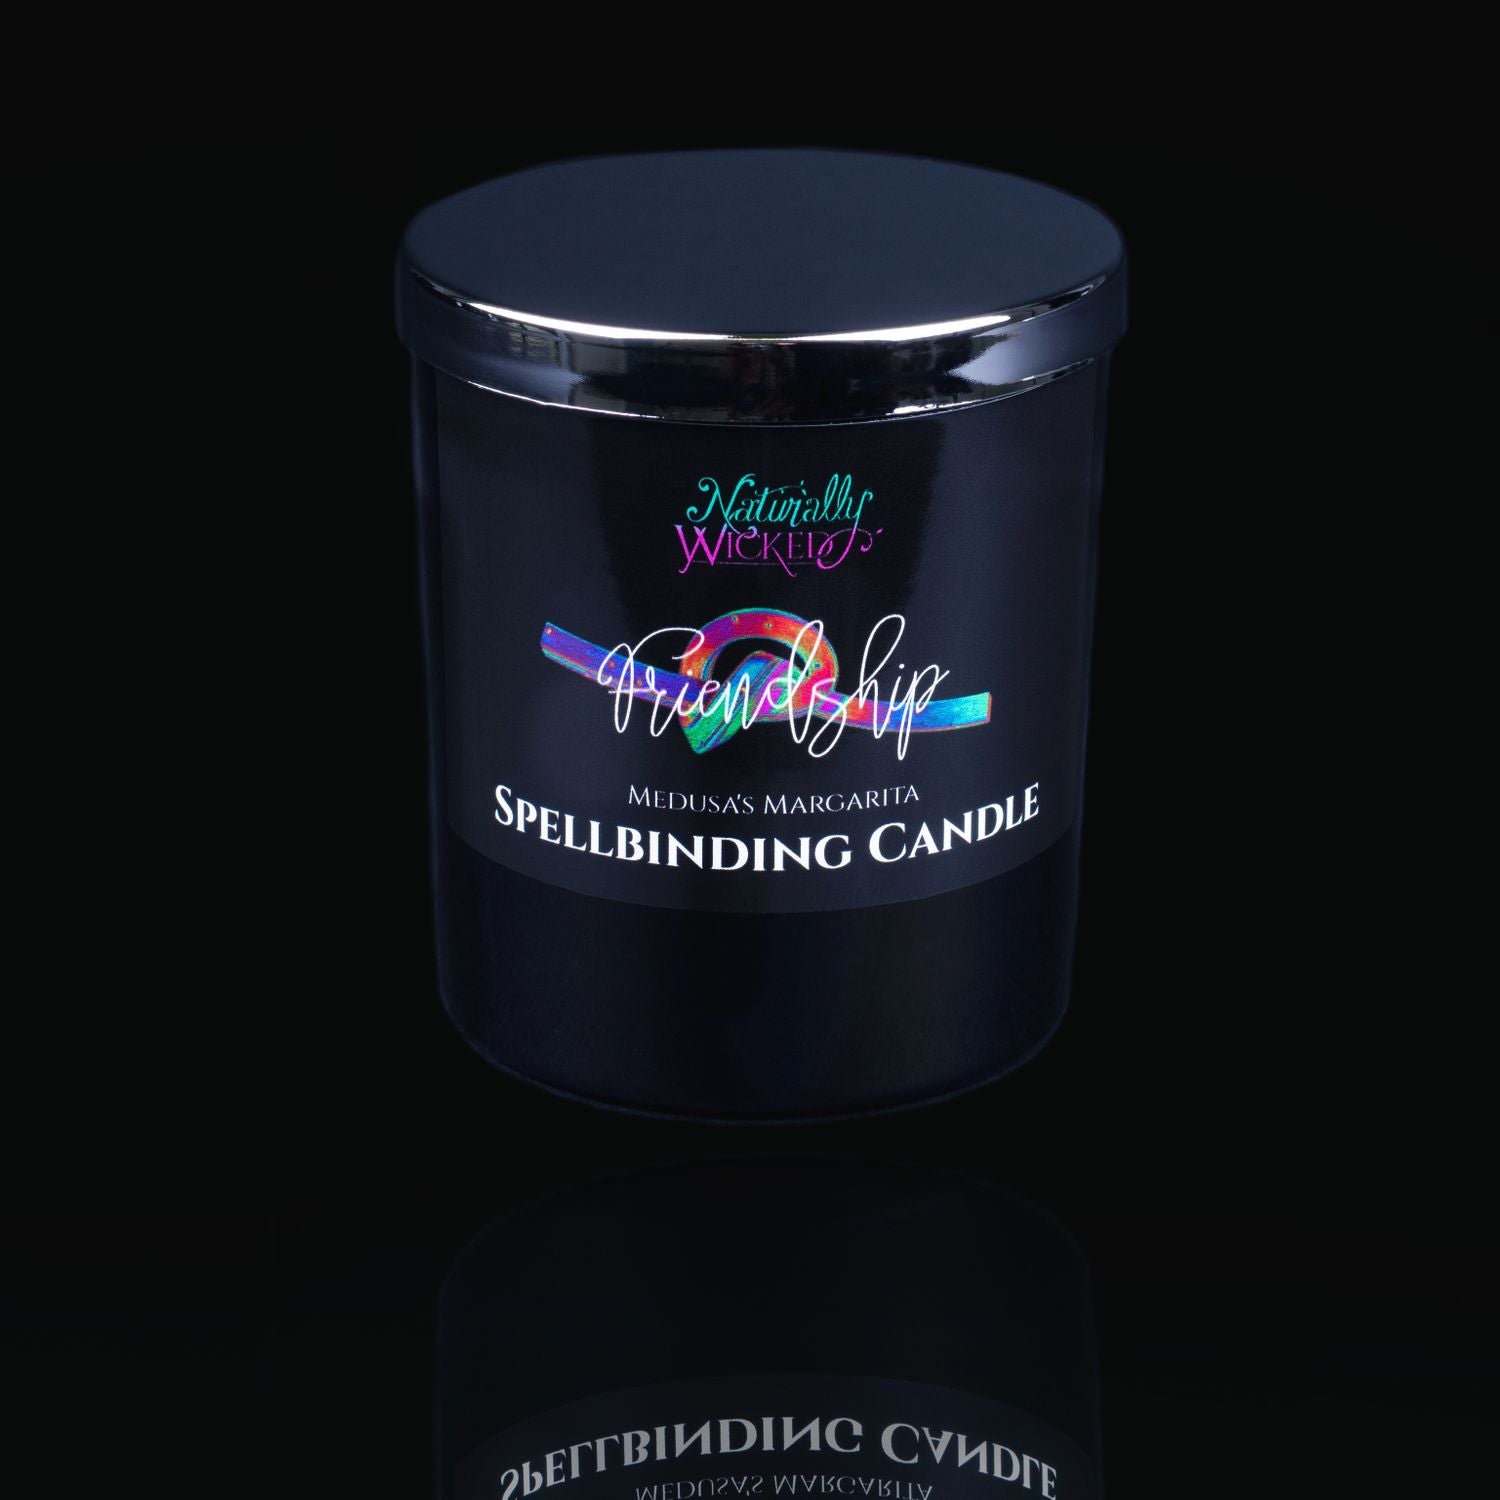 Naturally Wicked Spellbinding Friendship Spell Candle With Mirror Finished Exquisite Lid In Place. Featuring A Black Gloss Label And A Rainbow Friendship Knot. A Unique Gift For Any Friend